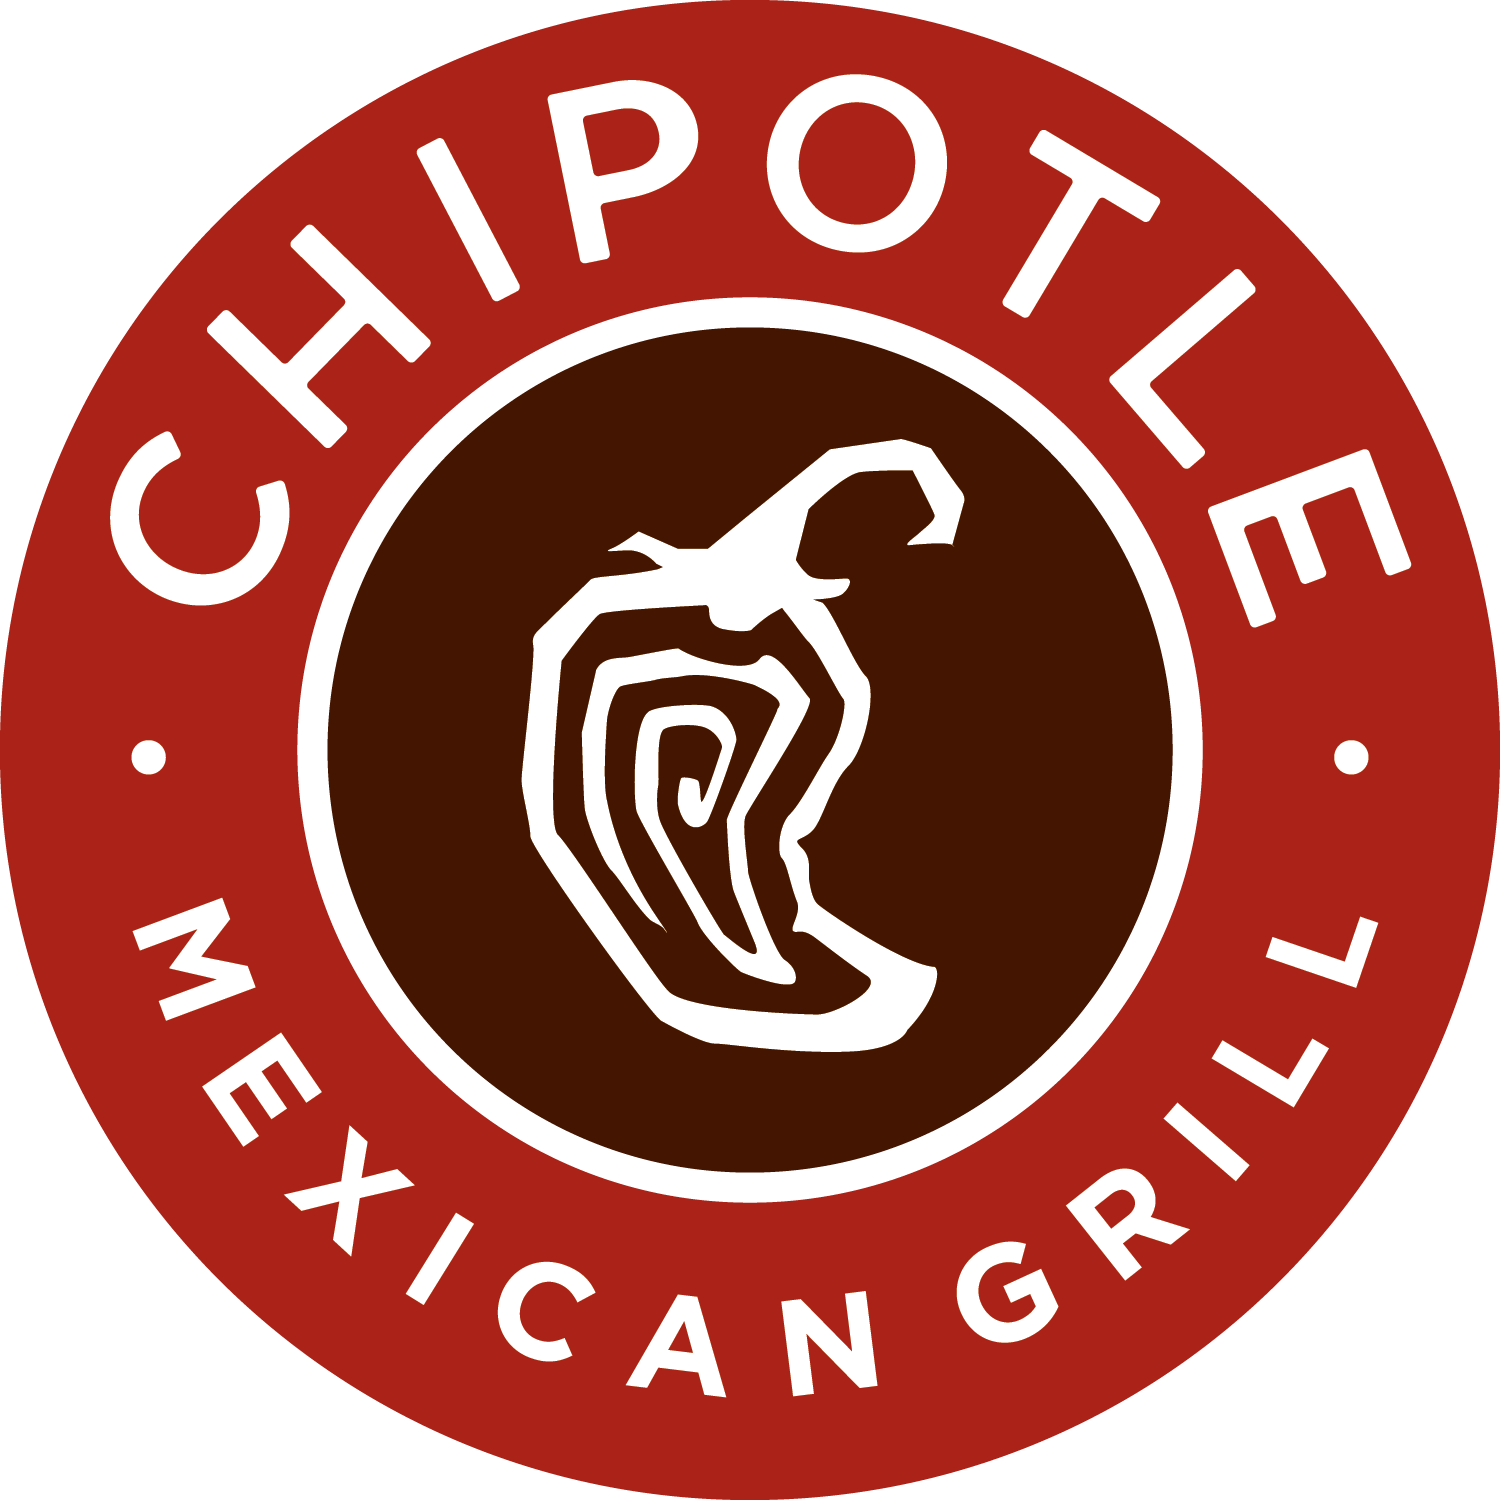 Thank You To This Year's Summer Reading Club Sponsors - Chipotle Mexican Grill (1500x1500)